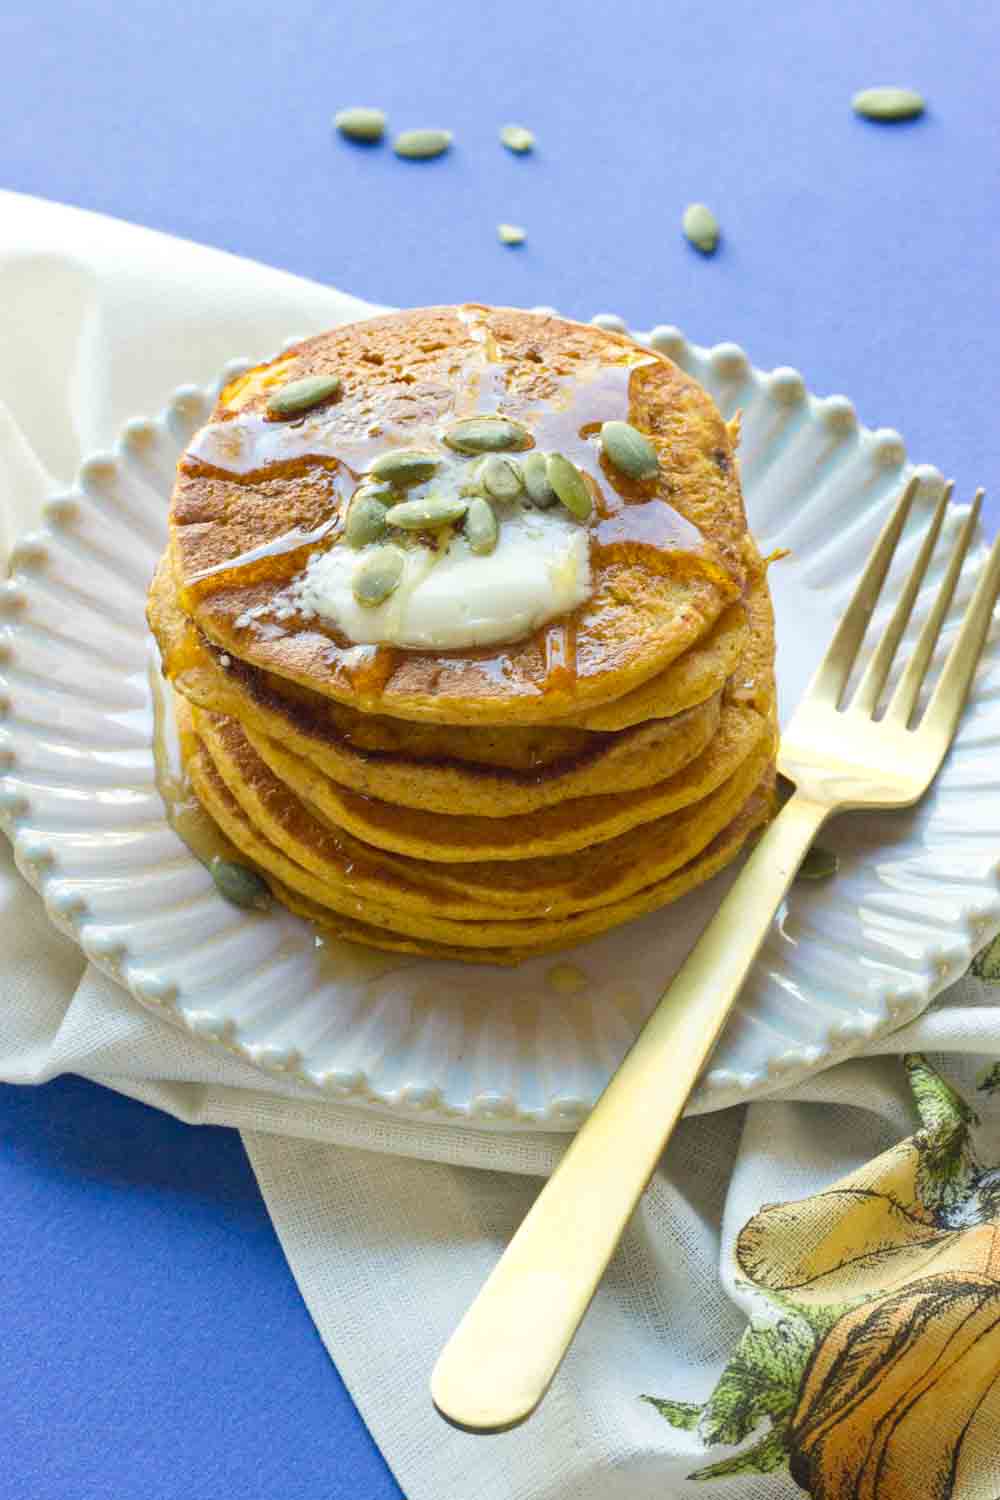 Okay so you want to know how to make restaurant style pancakes?! Use the CAST IRON SKILLET!! It will change your pancake life. Helloooo beautiful stack of Gluten Free Pumpkin Pancakes, my fork is coming for you. 